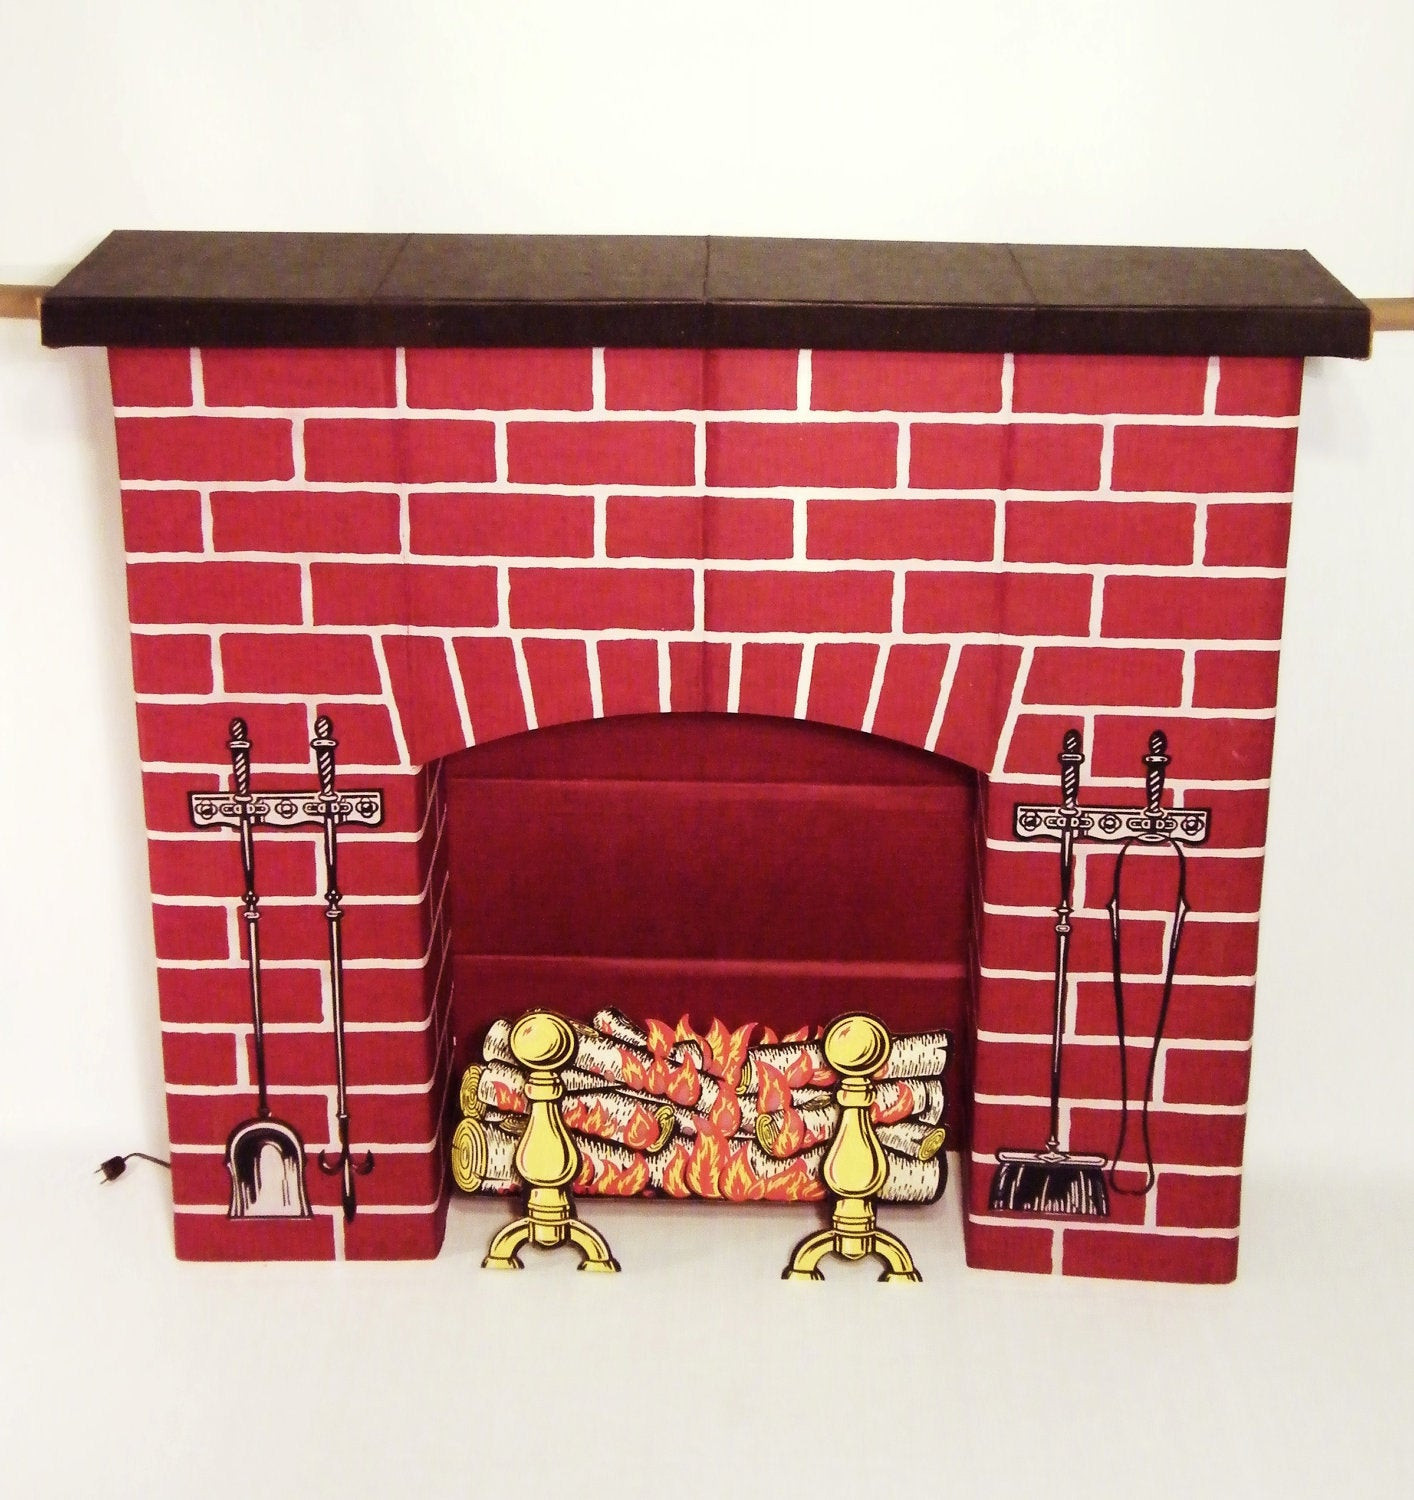 Vintage Christmas Cardboard Fireplace
 Full Size Christmas Fireplace by ohiopicker on Etsy